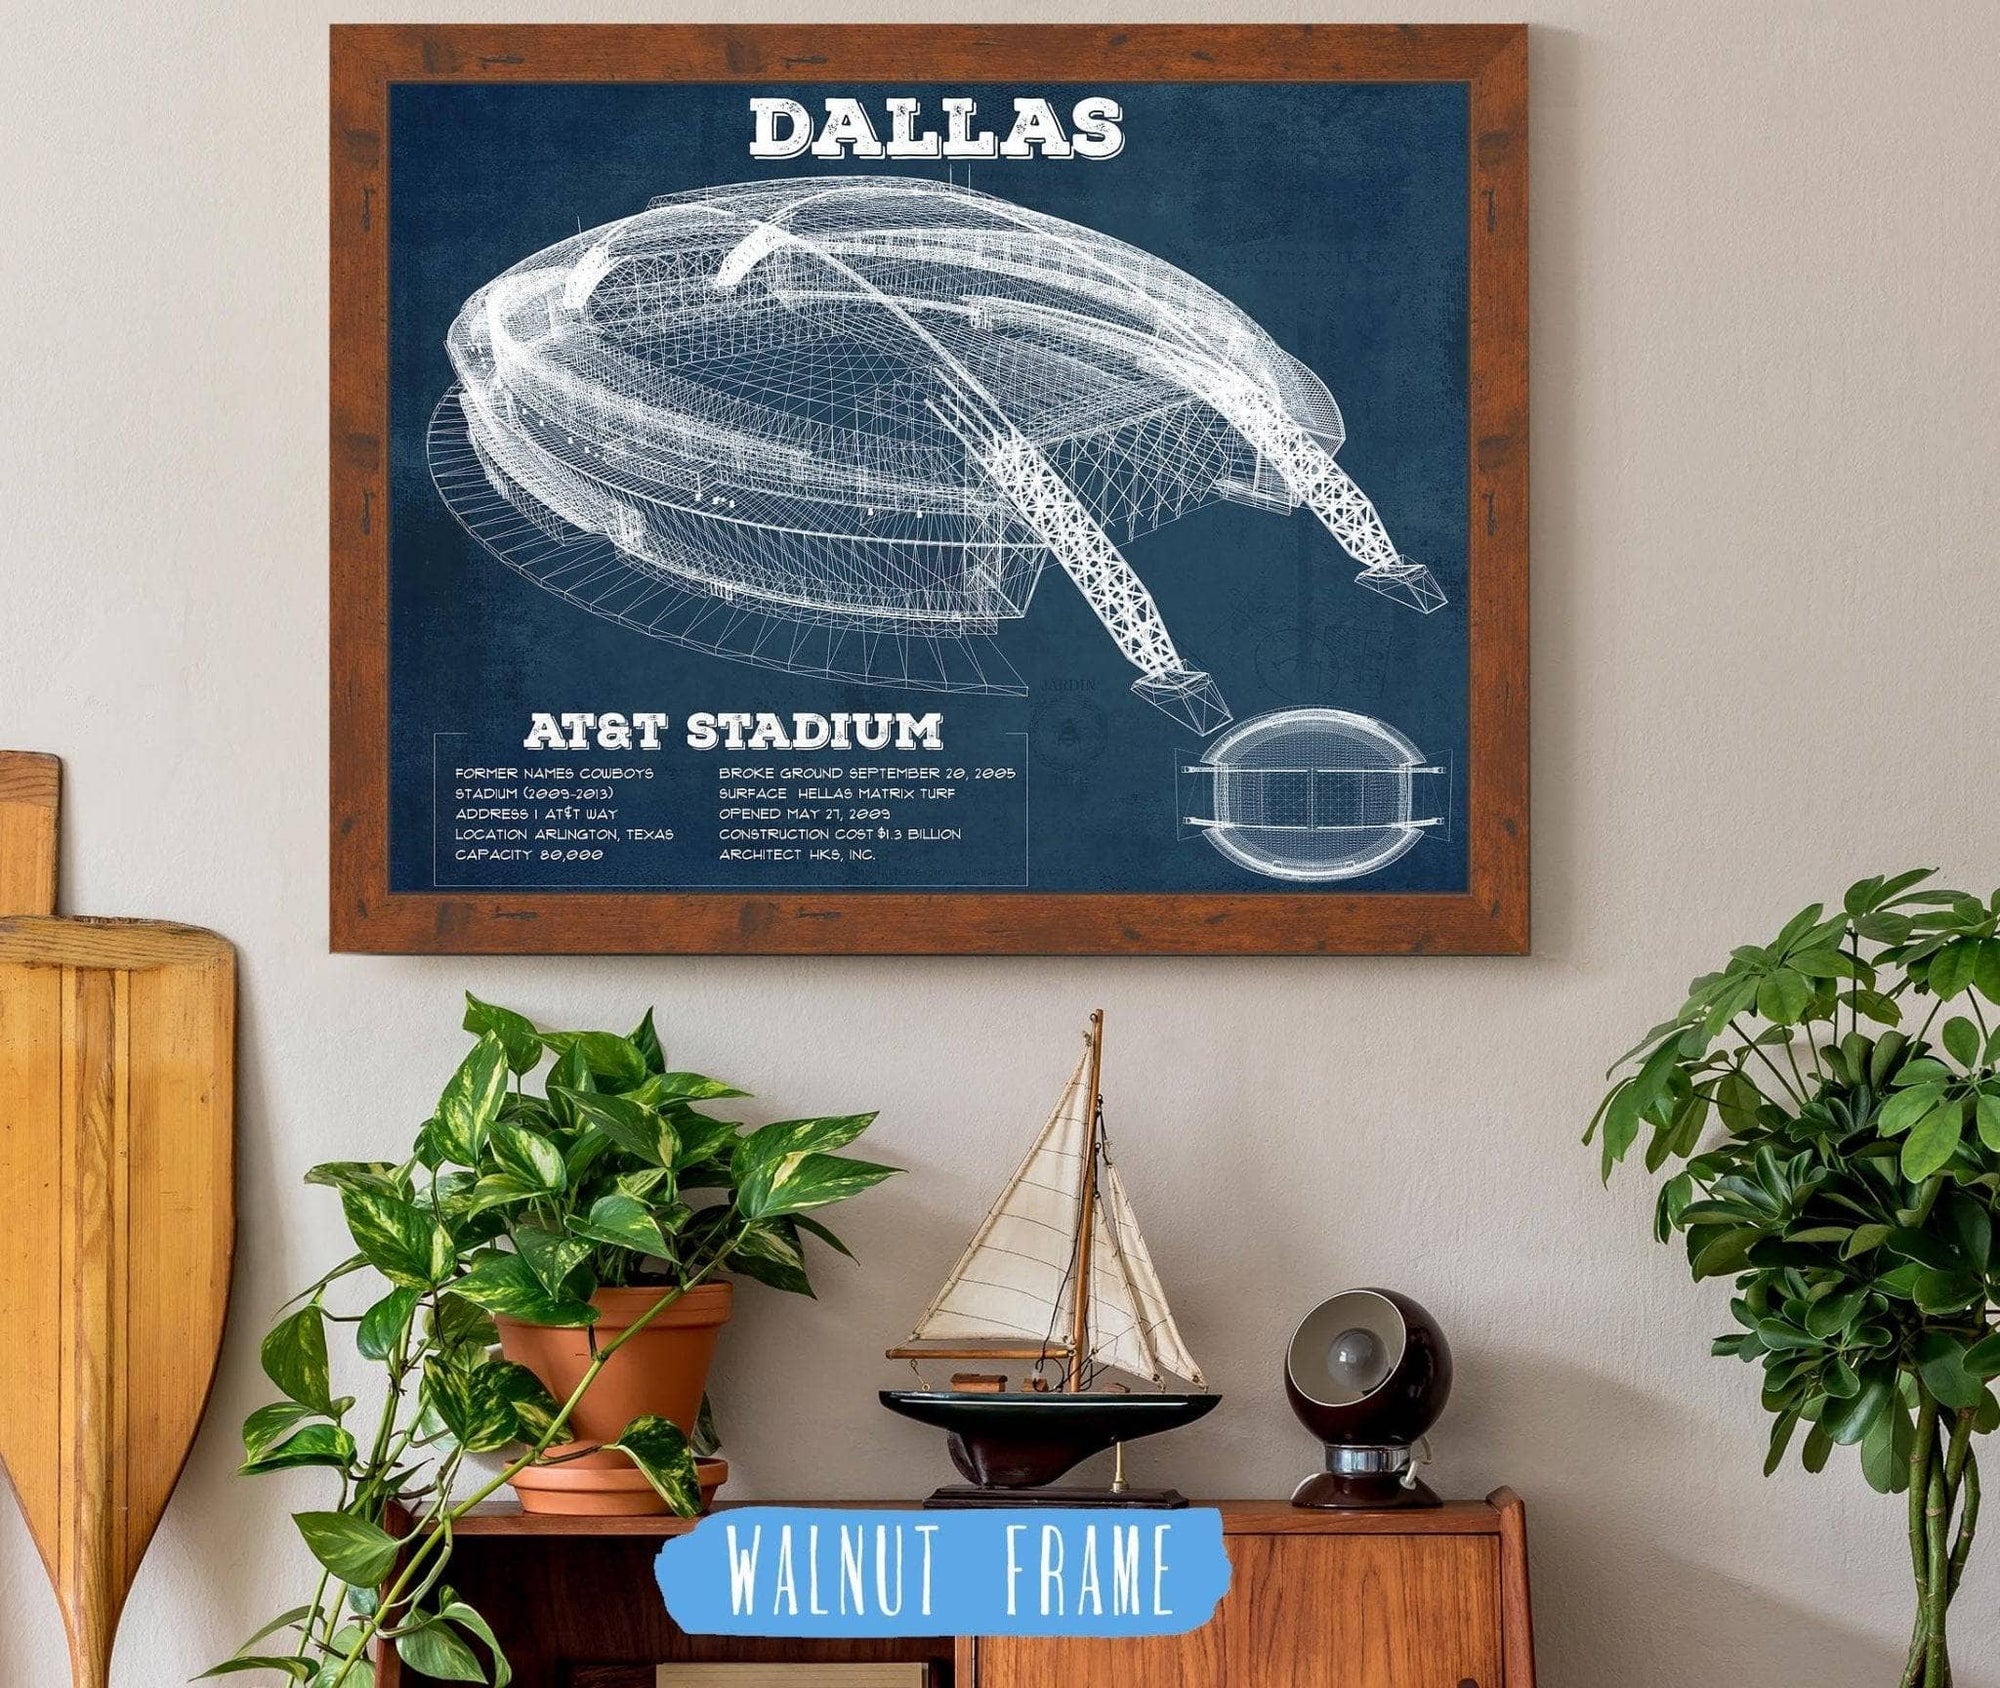 Cutler West Pro Football Collection 14" x 11" / Walnut Frame Dallas Cowboys - AT&T Stadium - Vintage Football Print 667011899-TOP